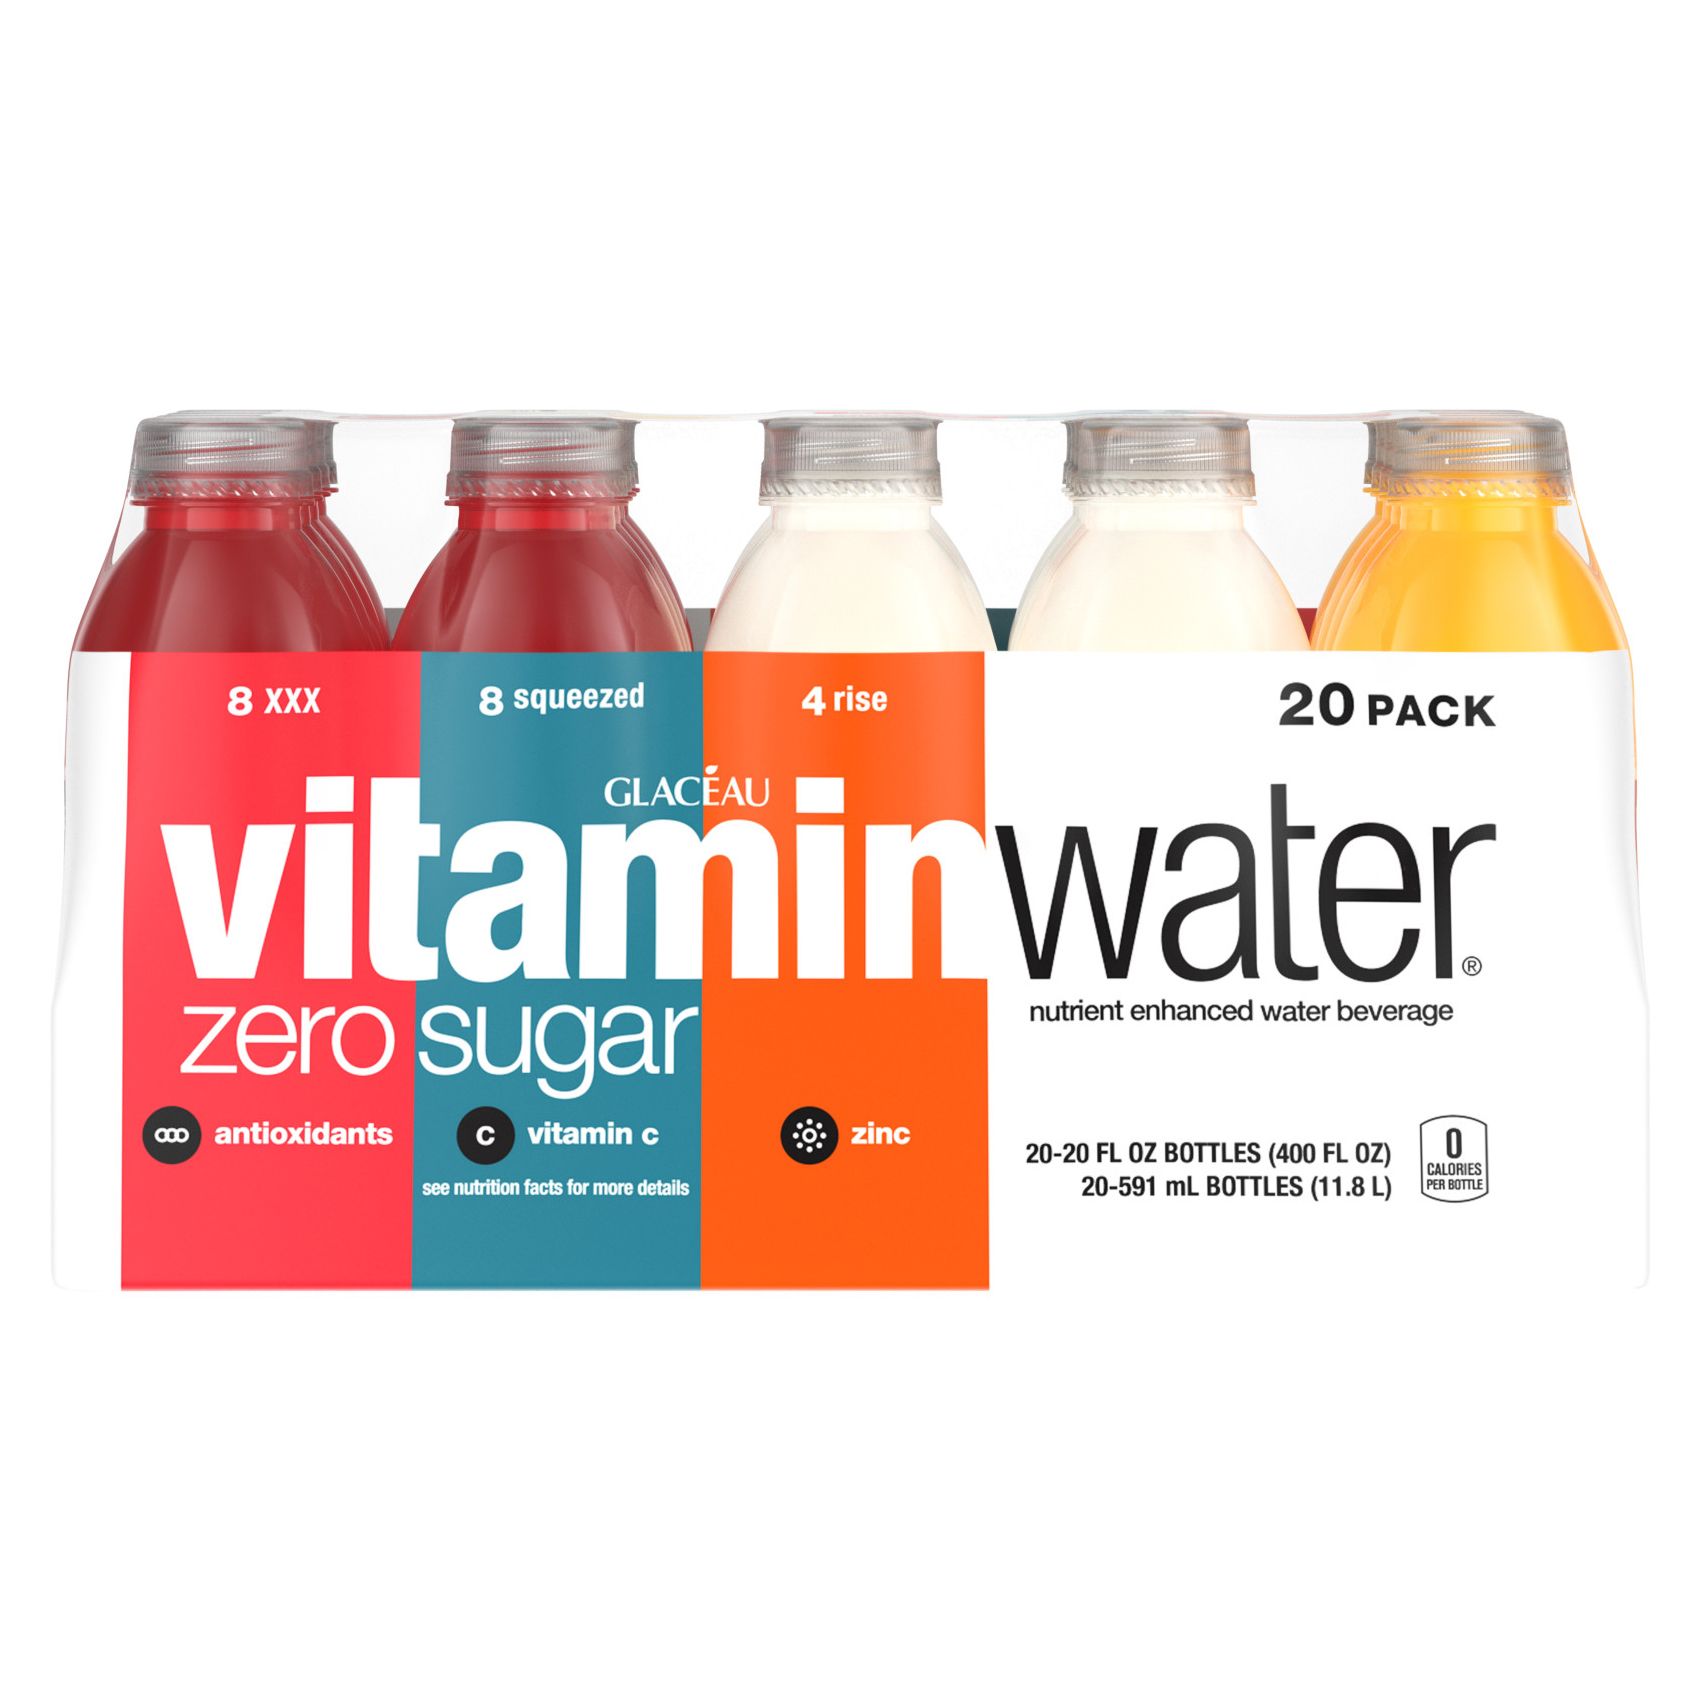  Hint Water Best Sellers Pack (Pack of 12), 16 Ounce Bottles, 3  Bottles Each of: Watermelon, Blackberry, Cherry, and Pineapple, Zero  Calories, Zero Sugar and Zero Sweeteners : Everything Else